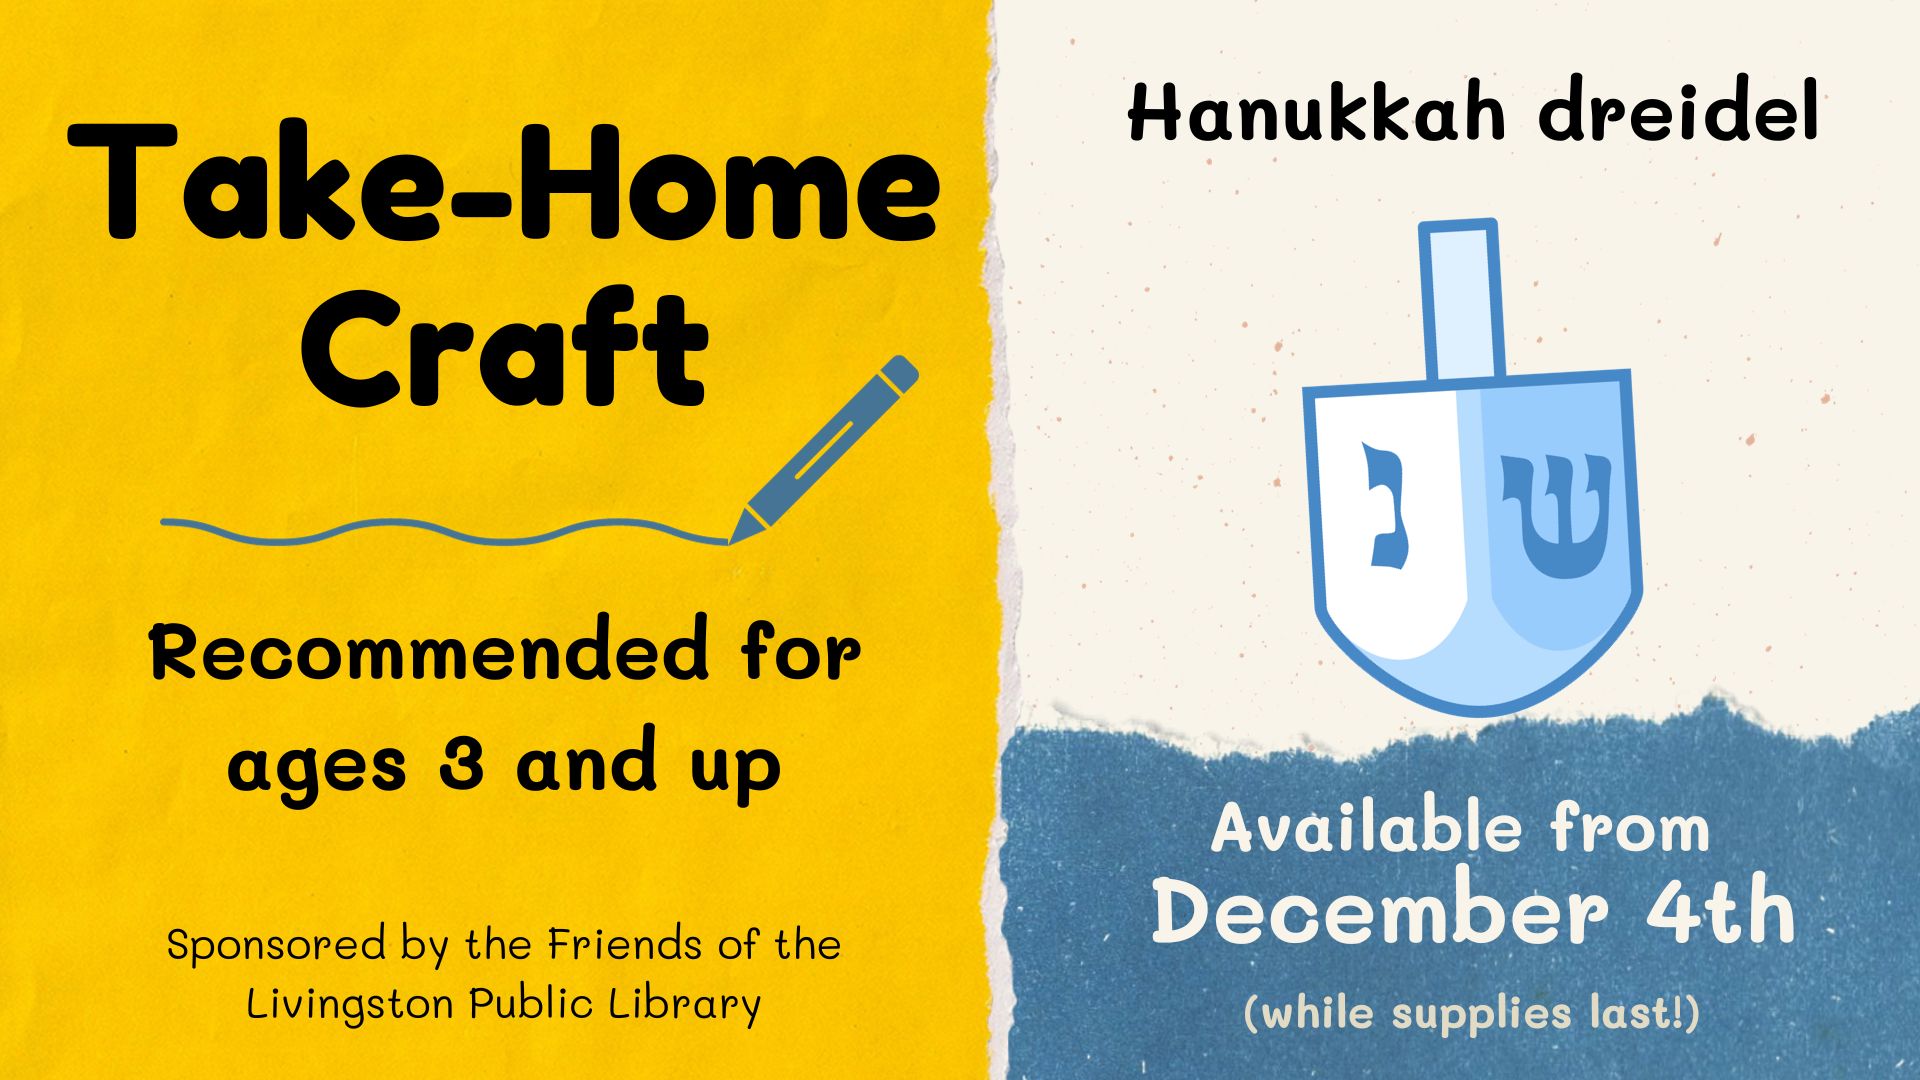 Take Home Craft recommended for ages 3 and up. Hanukkah Dreidel with image of blue Hanukkah dreidel. Available from December 4th while supplies lastFriends of the Livingston Library